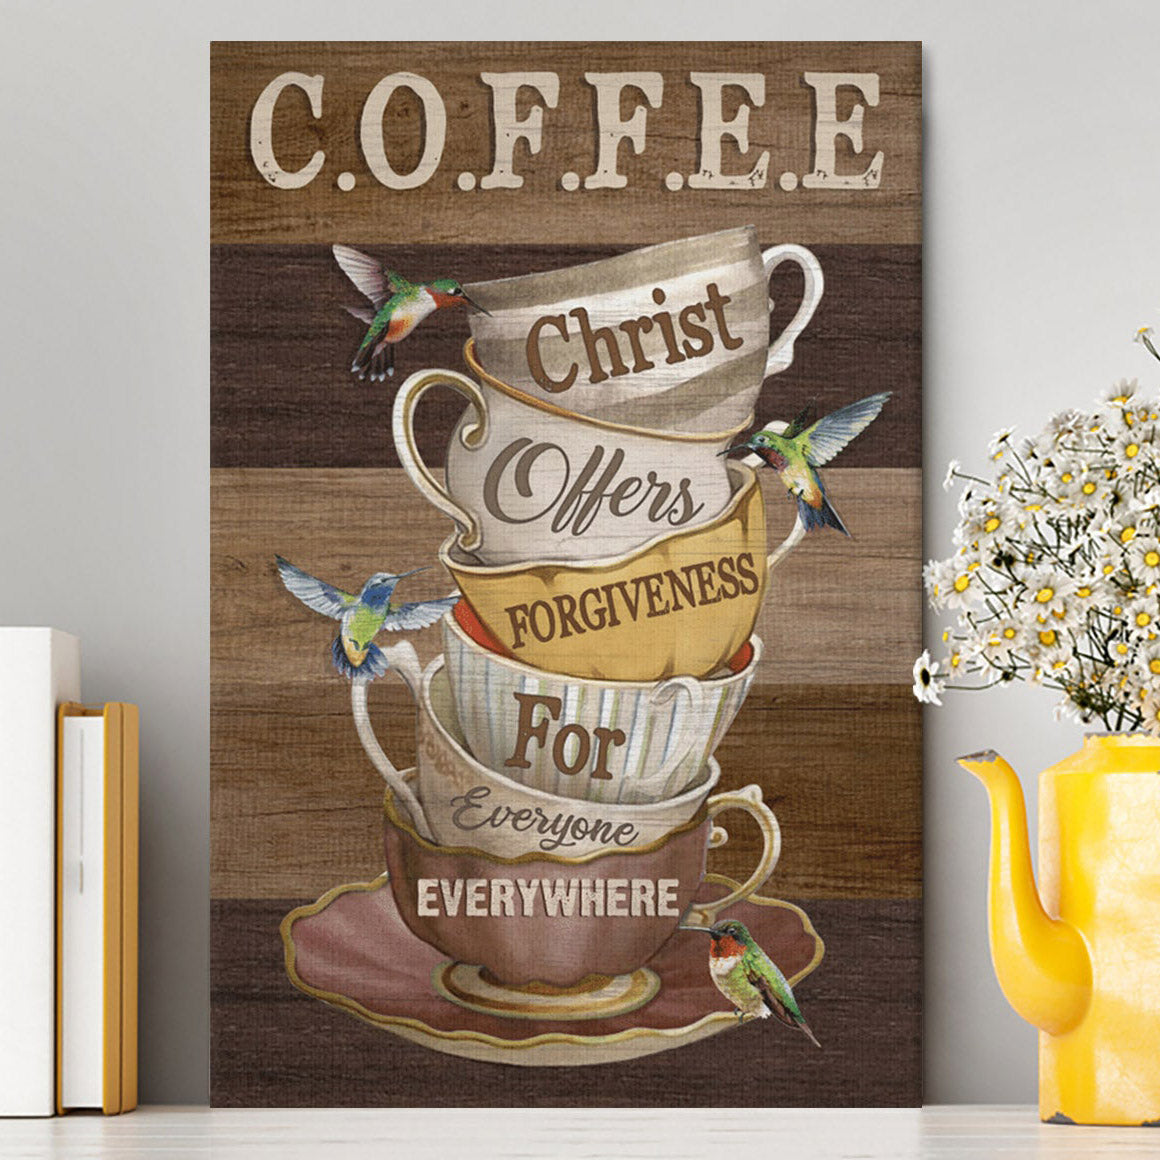 Coffee Christ Offers Forgiveness For Everyone Everywhere Canvas Wall Art - Christian Wall Art Decor - Religious Canvas Prints